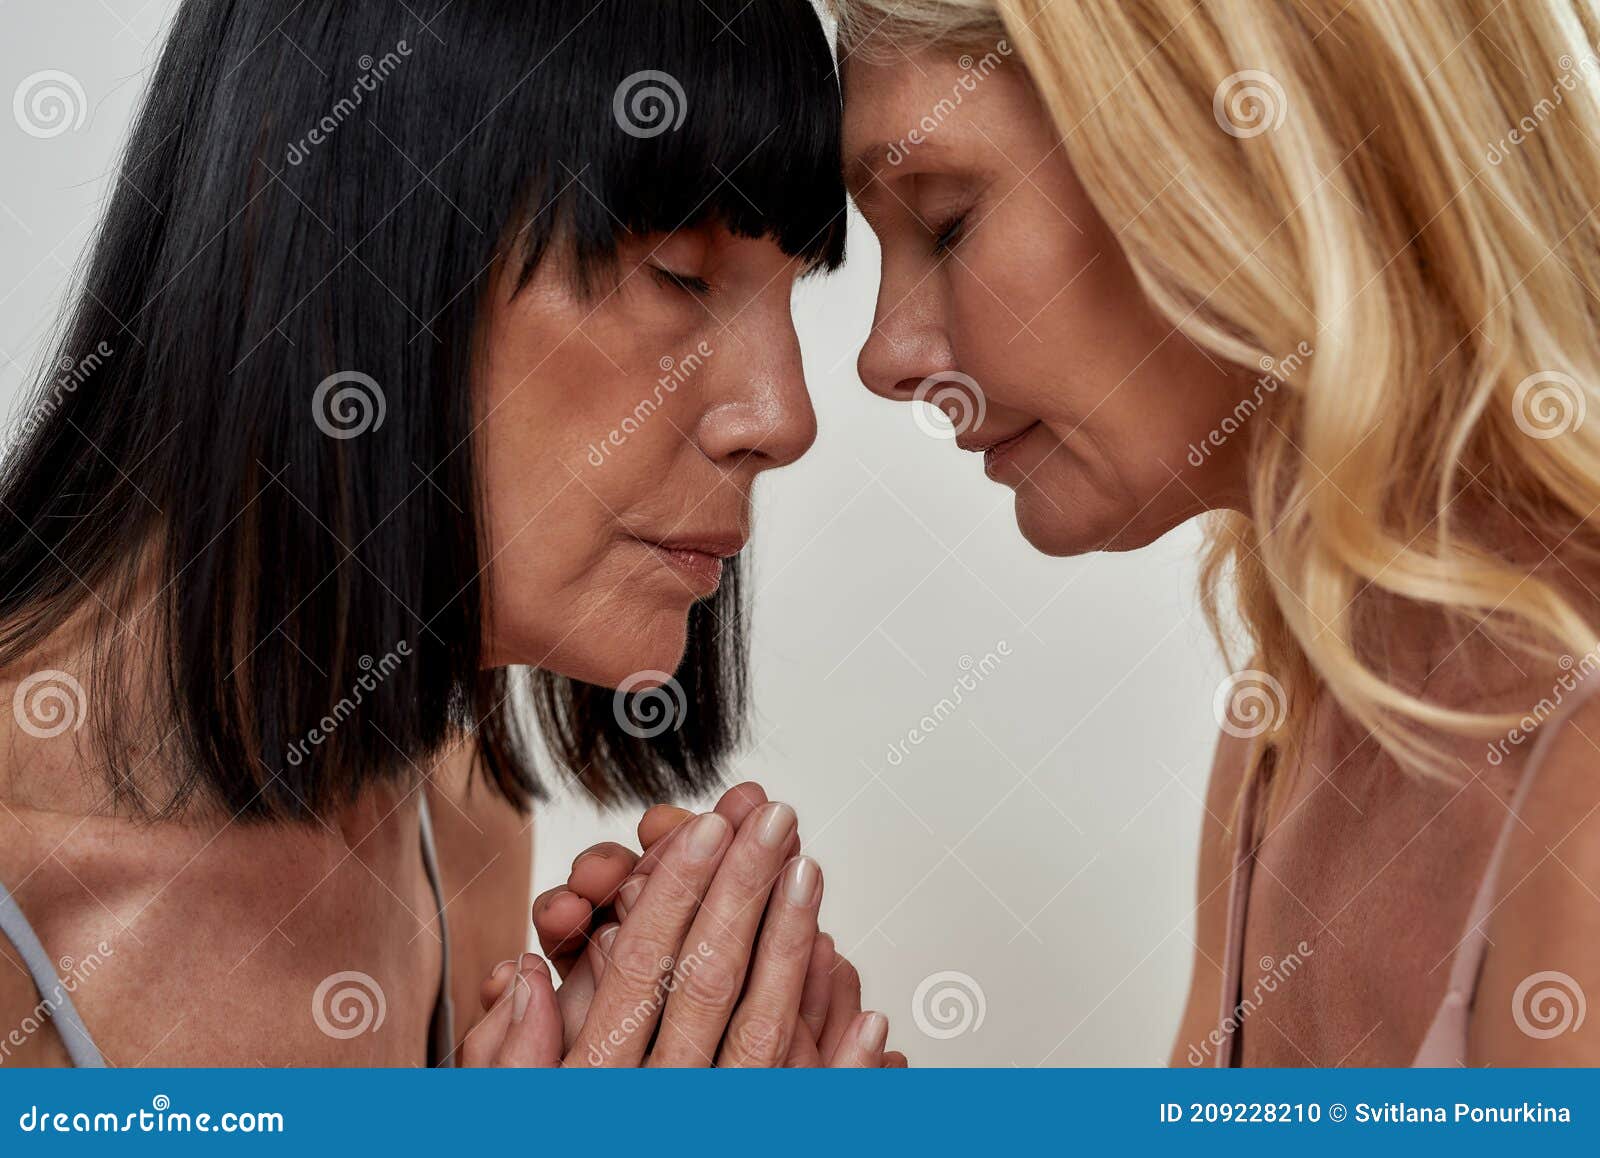 Close Up Portrait of Two Women in Underwear Holding Each Other Hands photo